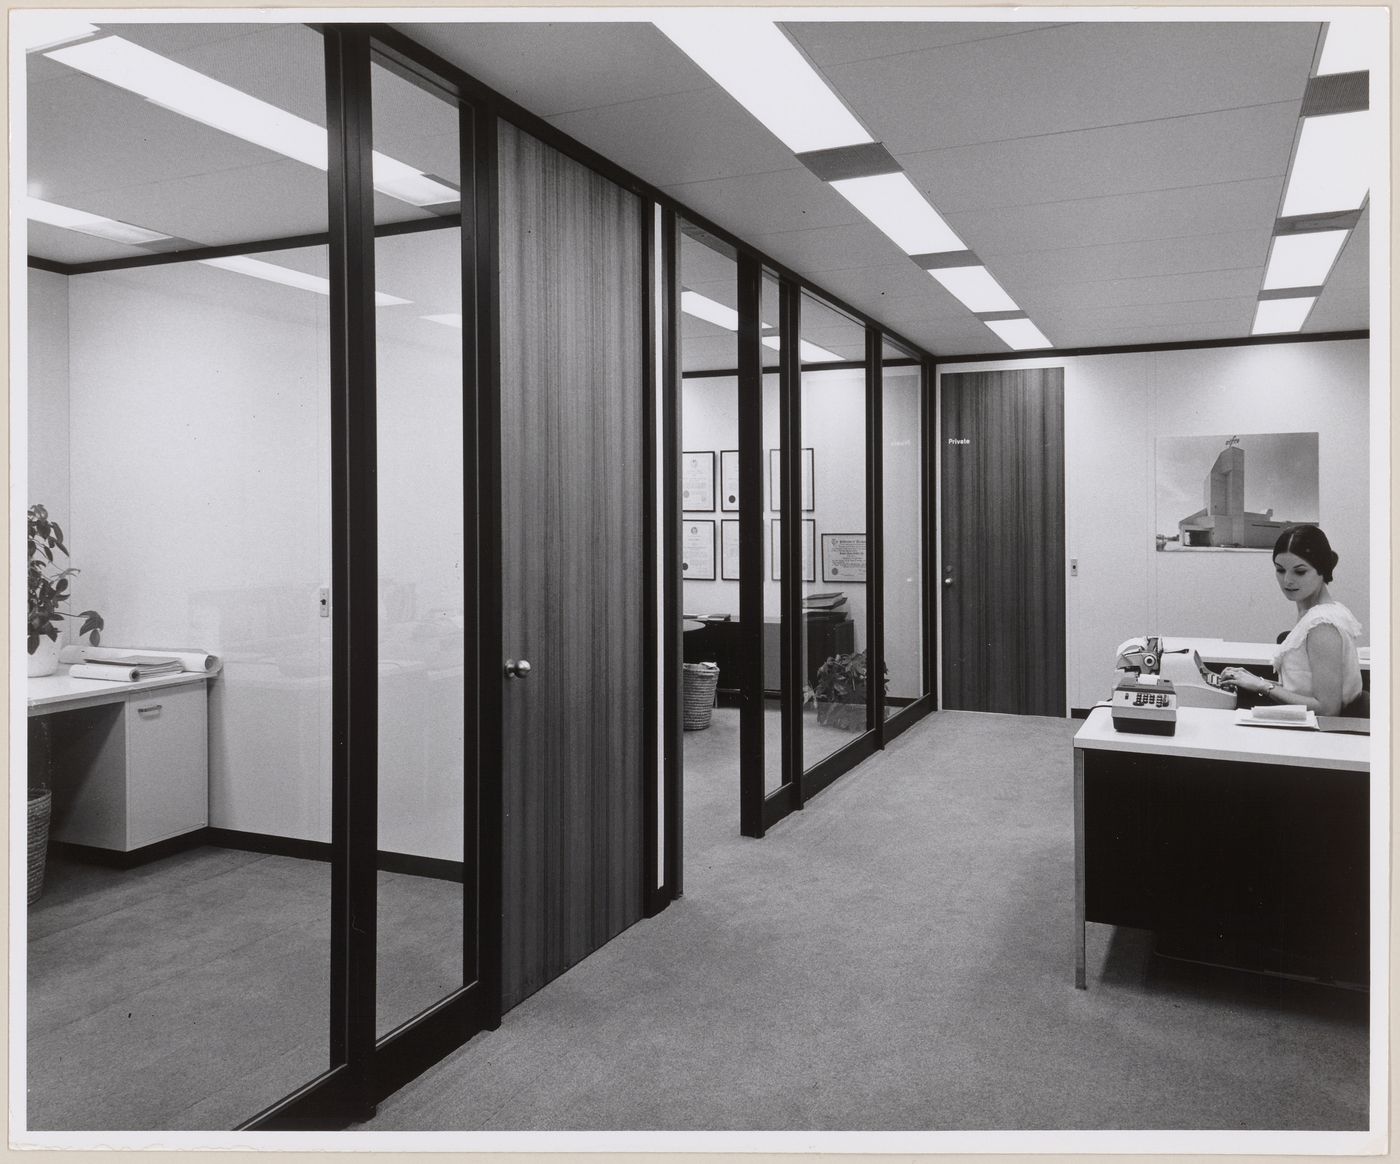 Interior view of John B. Parkin Associates office building with employee at desk, possibly Montreal office